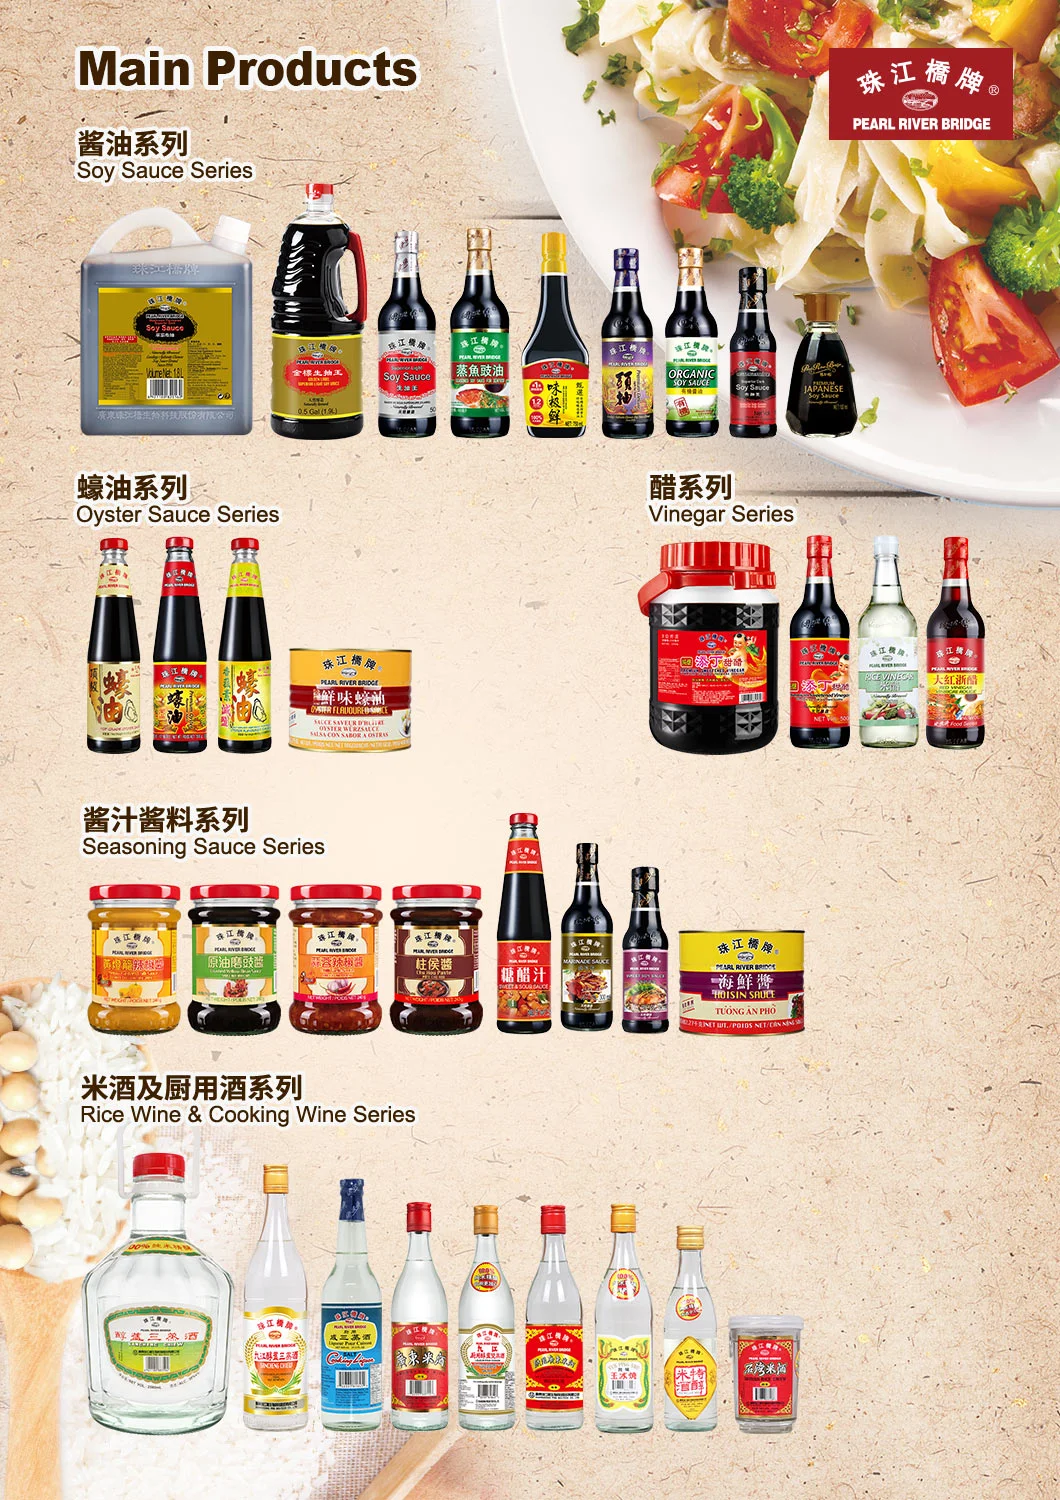 Pearl River Bridge Superior Light Soy Sauce 500ml Pet Bottle Healthy and High Quality Food Additive